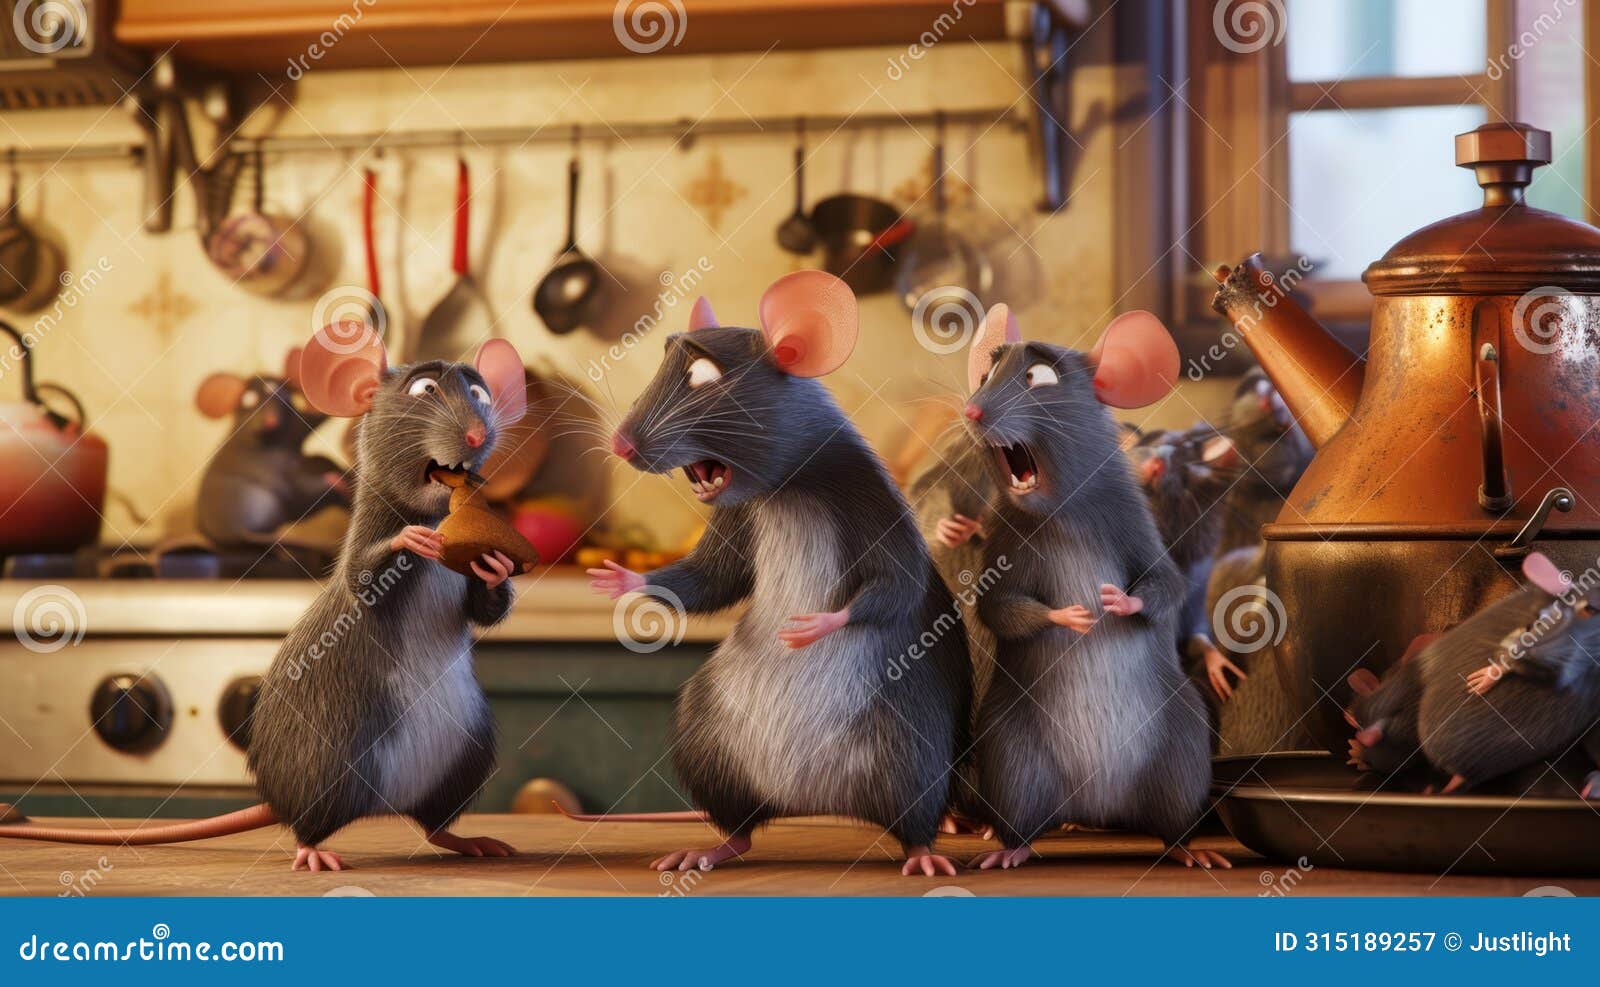 the mice have created a diversion by dressing up as a group of rats and sneaking into the kitchen while the real rats